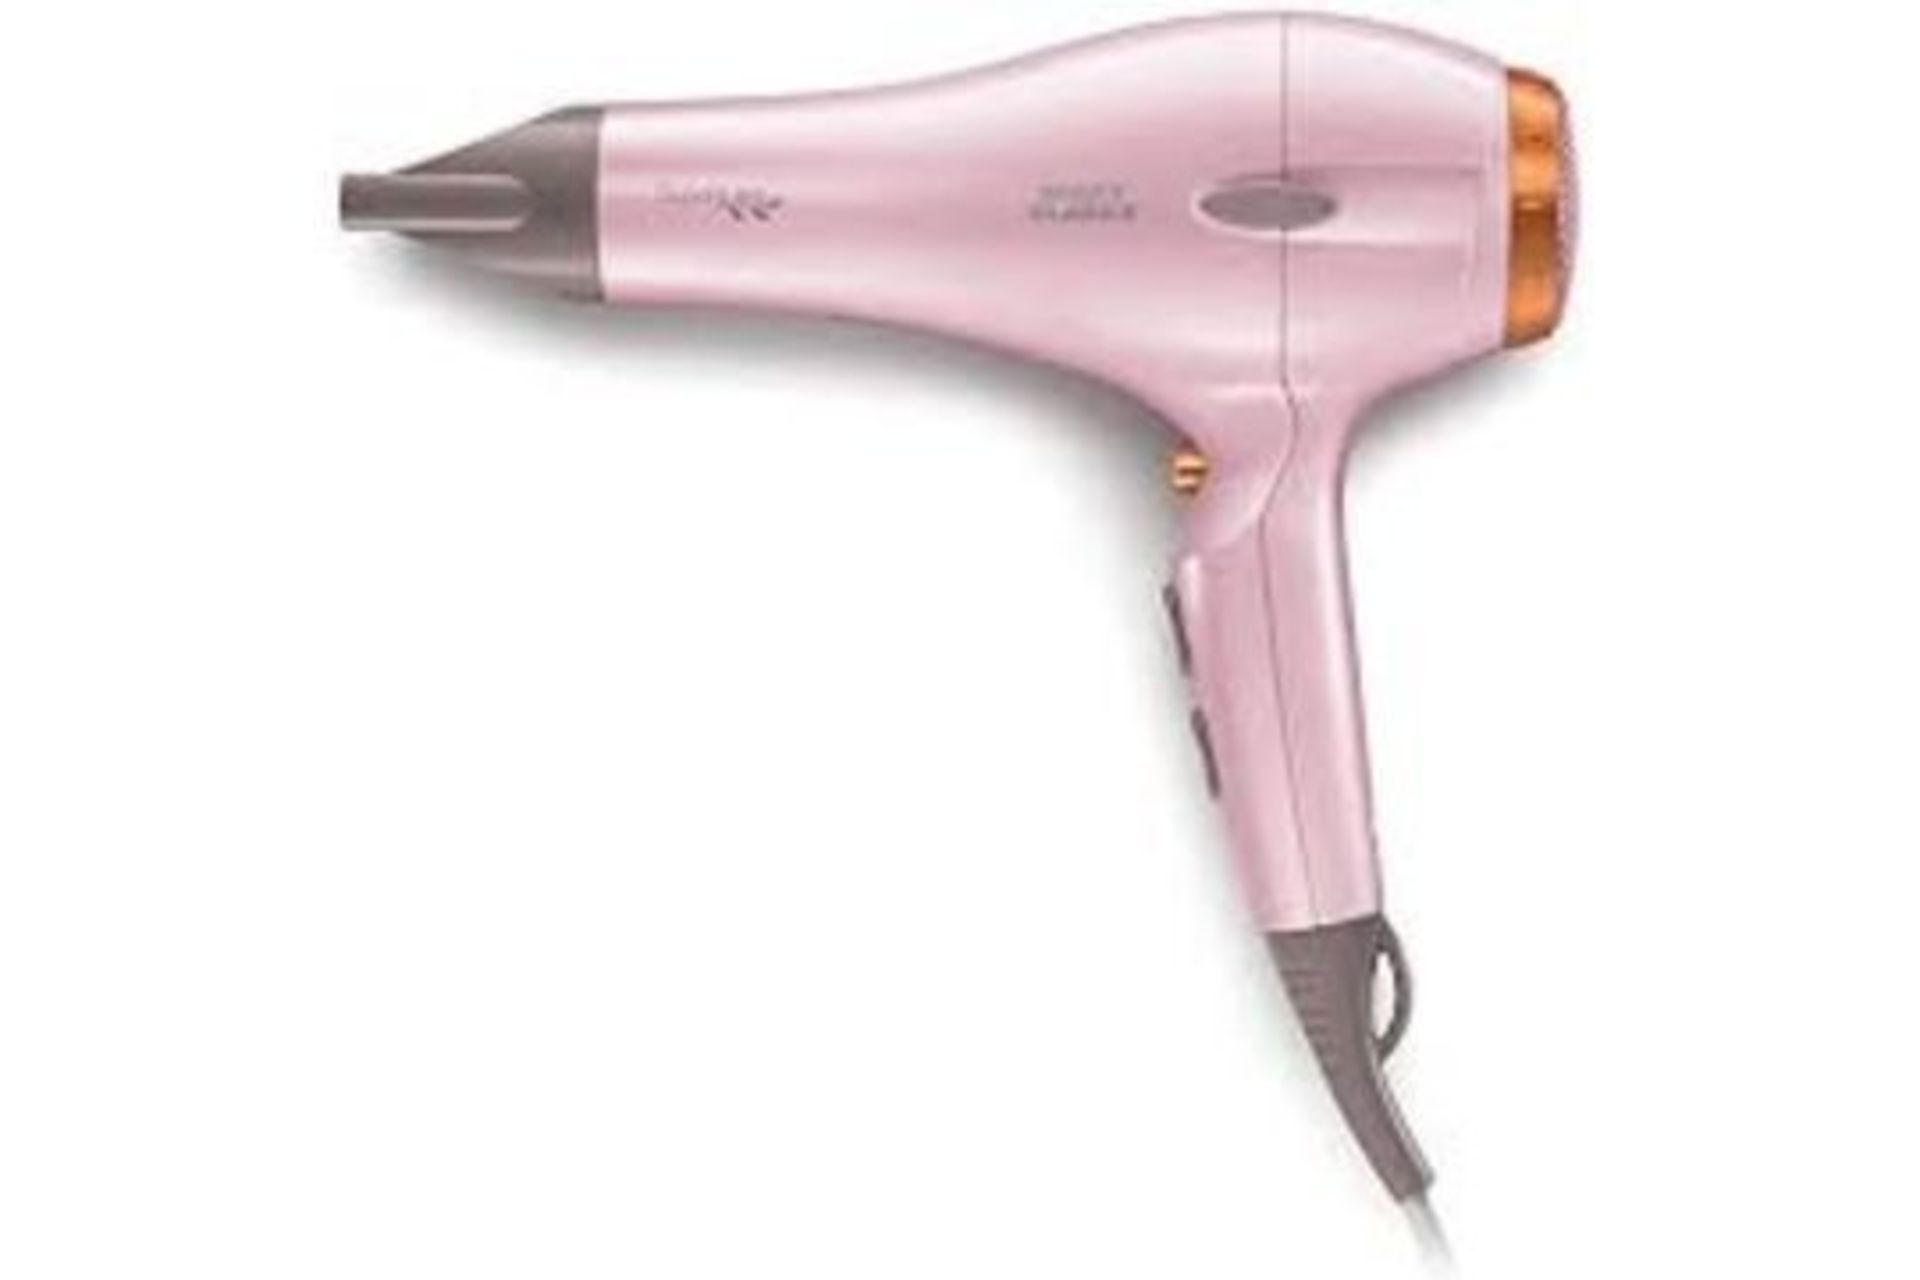 New Nicky Clarke Pink Supershine Hair Dryer - RRP £49.99.